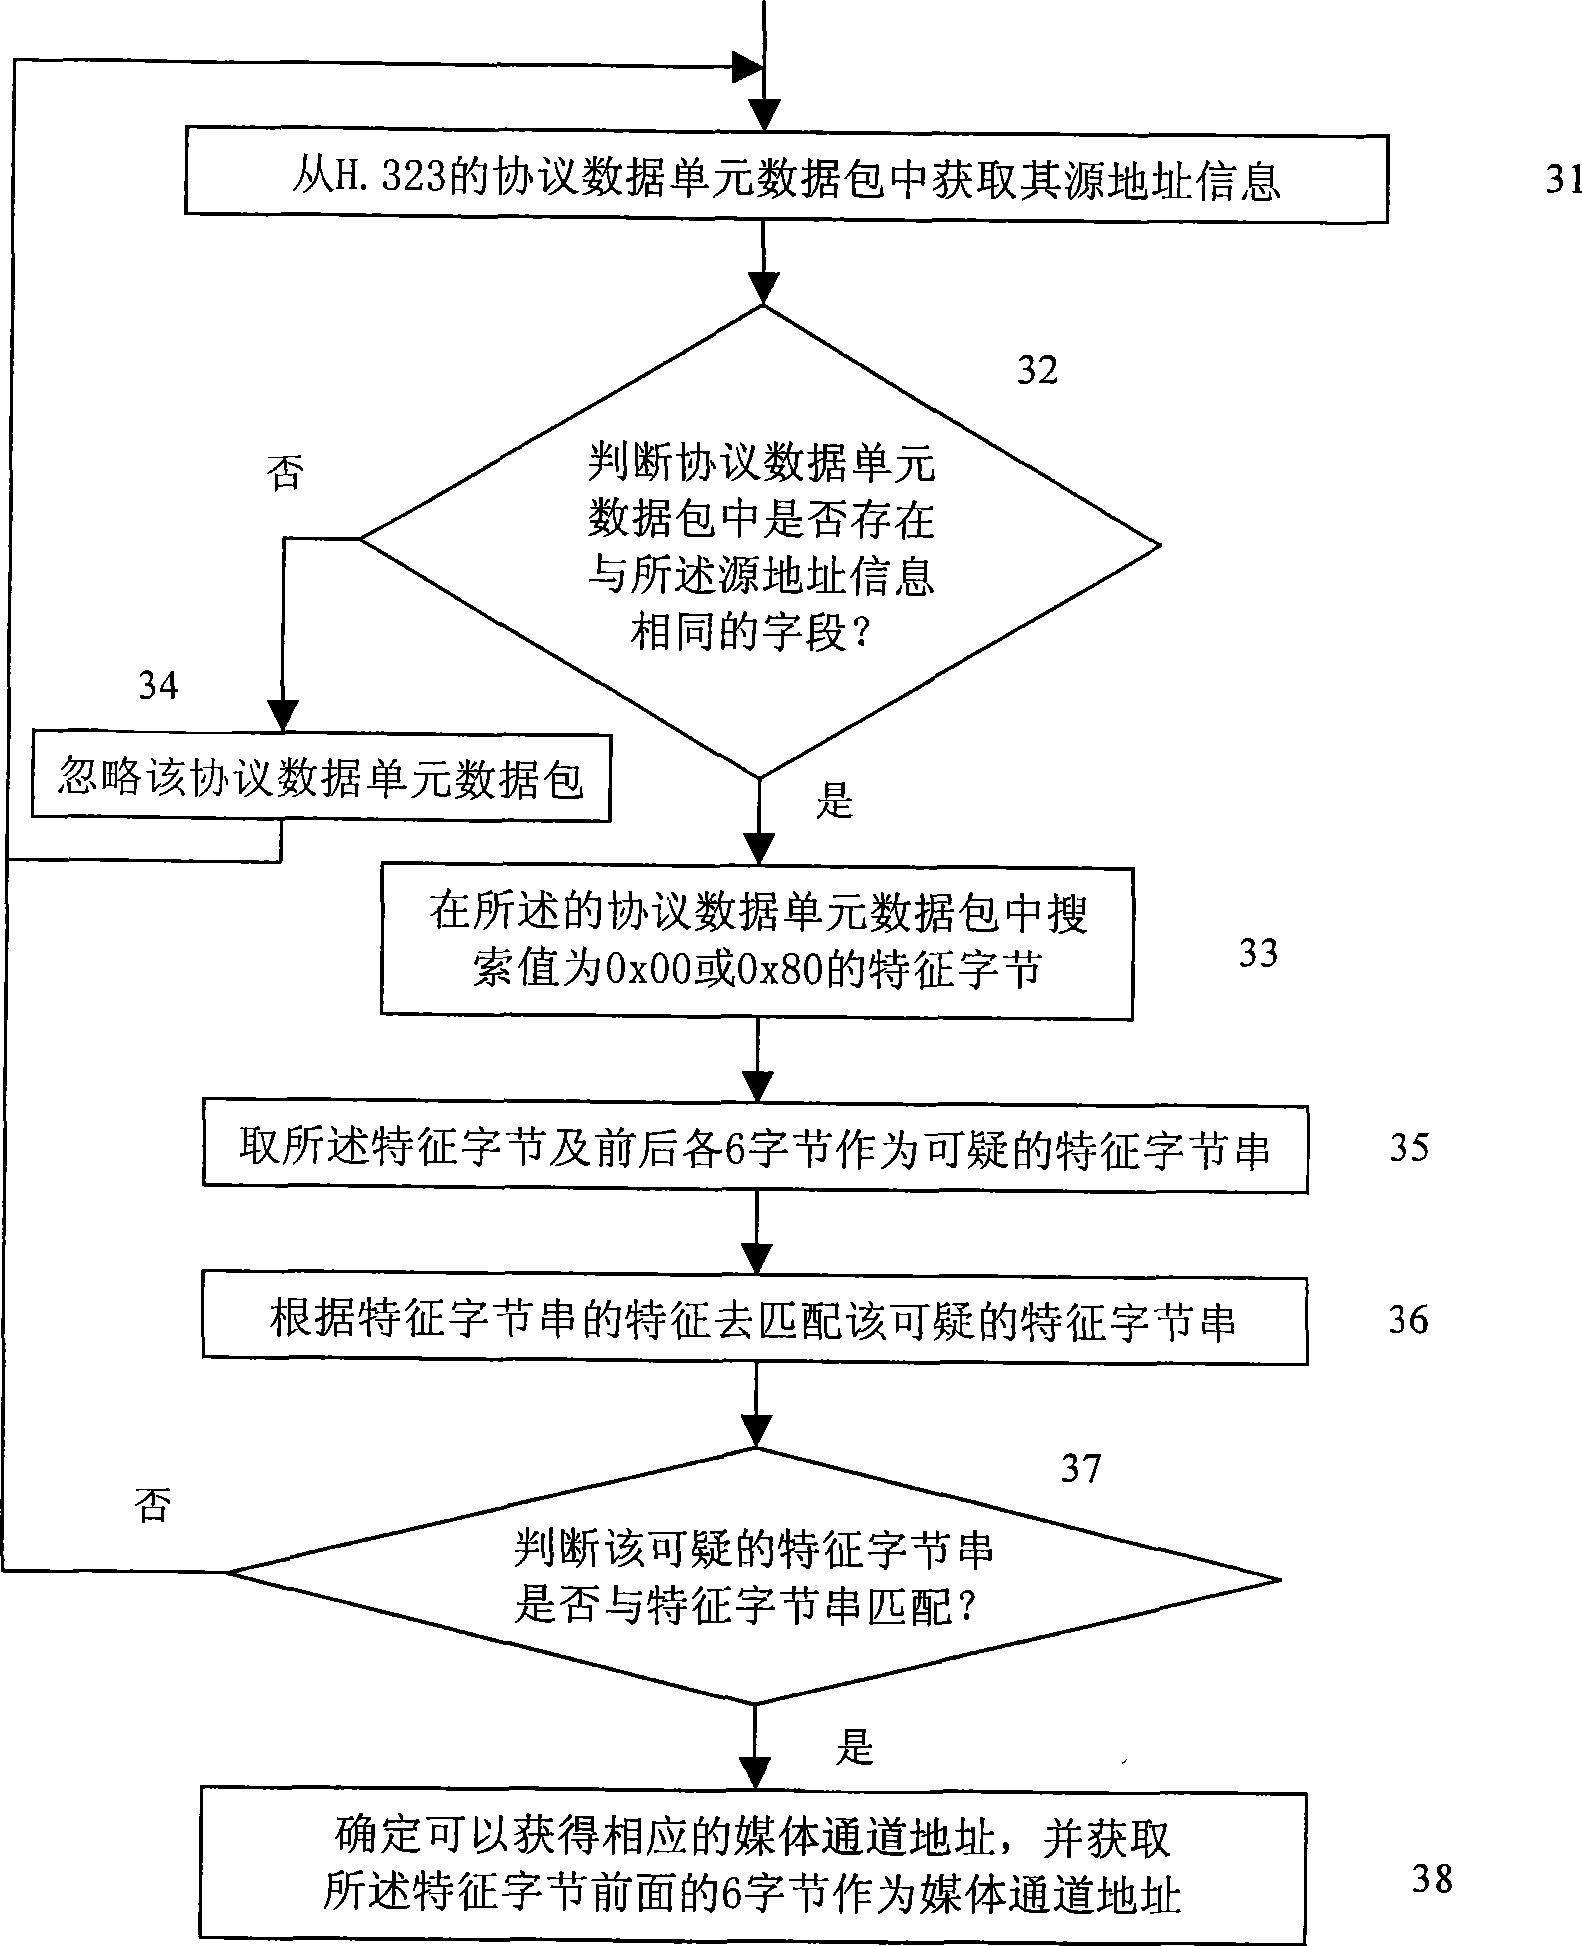 Realization method for obtaining media channel address in H.323 application process